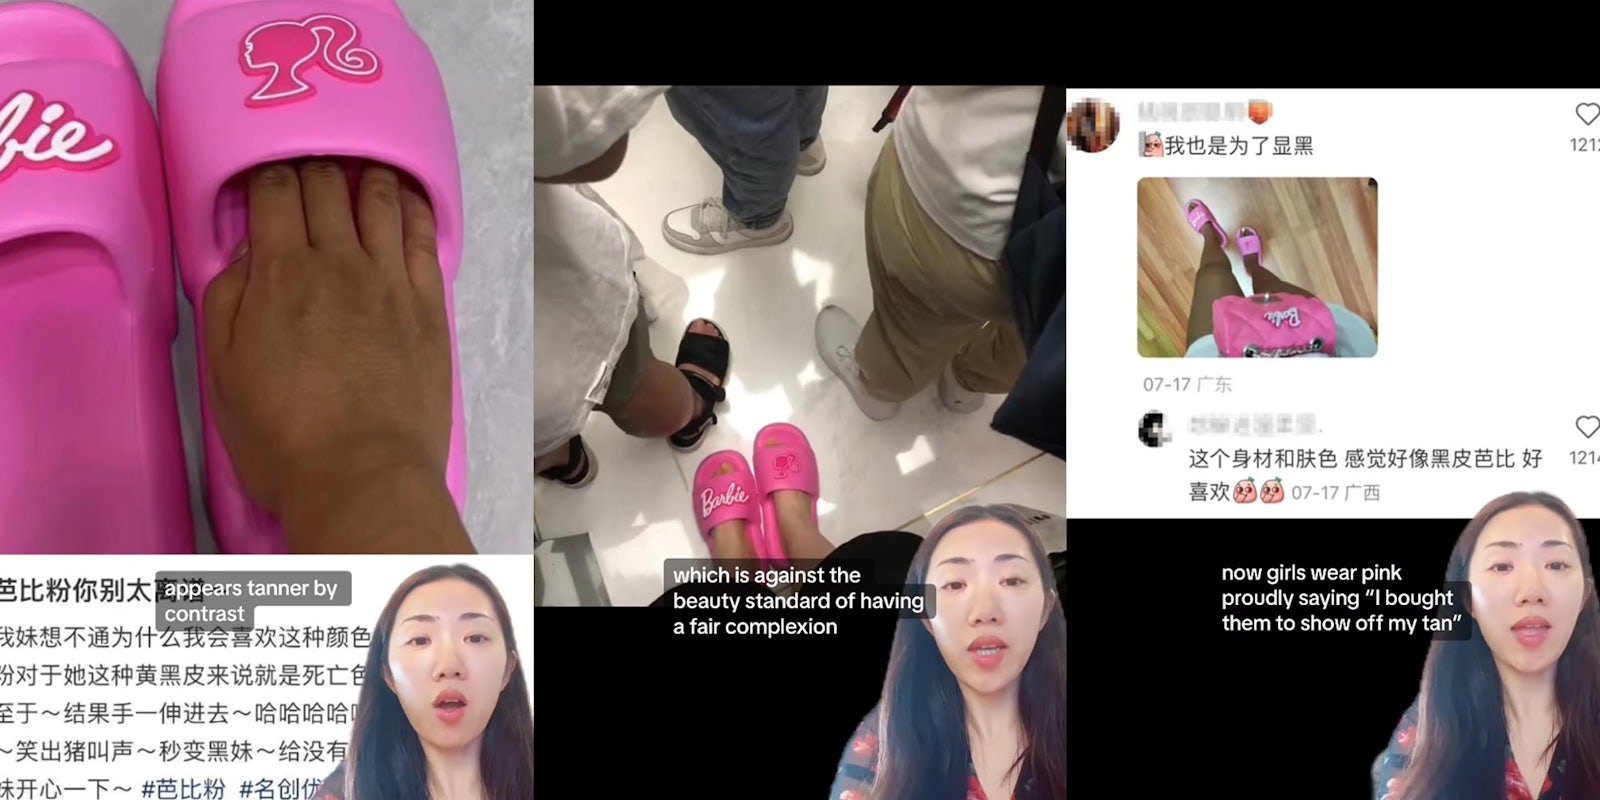 woman greenscreen TikTok over image of barbie shoes with caption 'appears tanner by contrast' (l) woman greenscreen TikTok over image of barbie shoes with caption 'which is against the beauty standard of having a fair complexion' (c) woman greenscreen TikTok over image of barbie shoes with caption 'now girls wear pink proudly saying 'I bought them to show off my tan' (r)